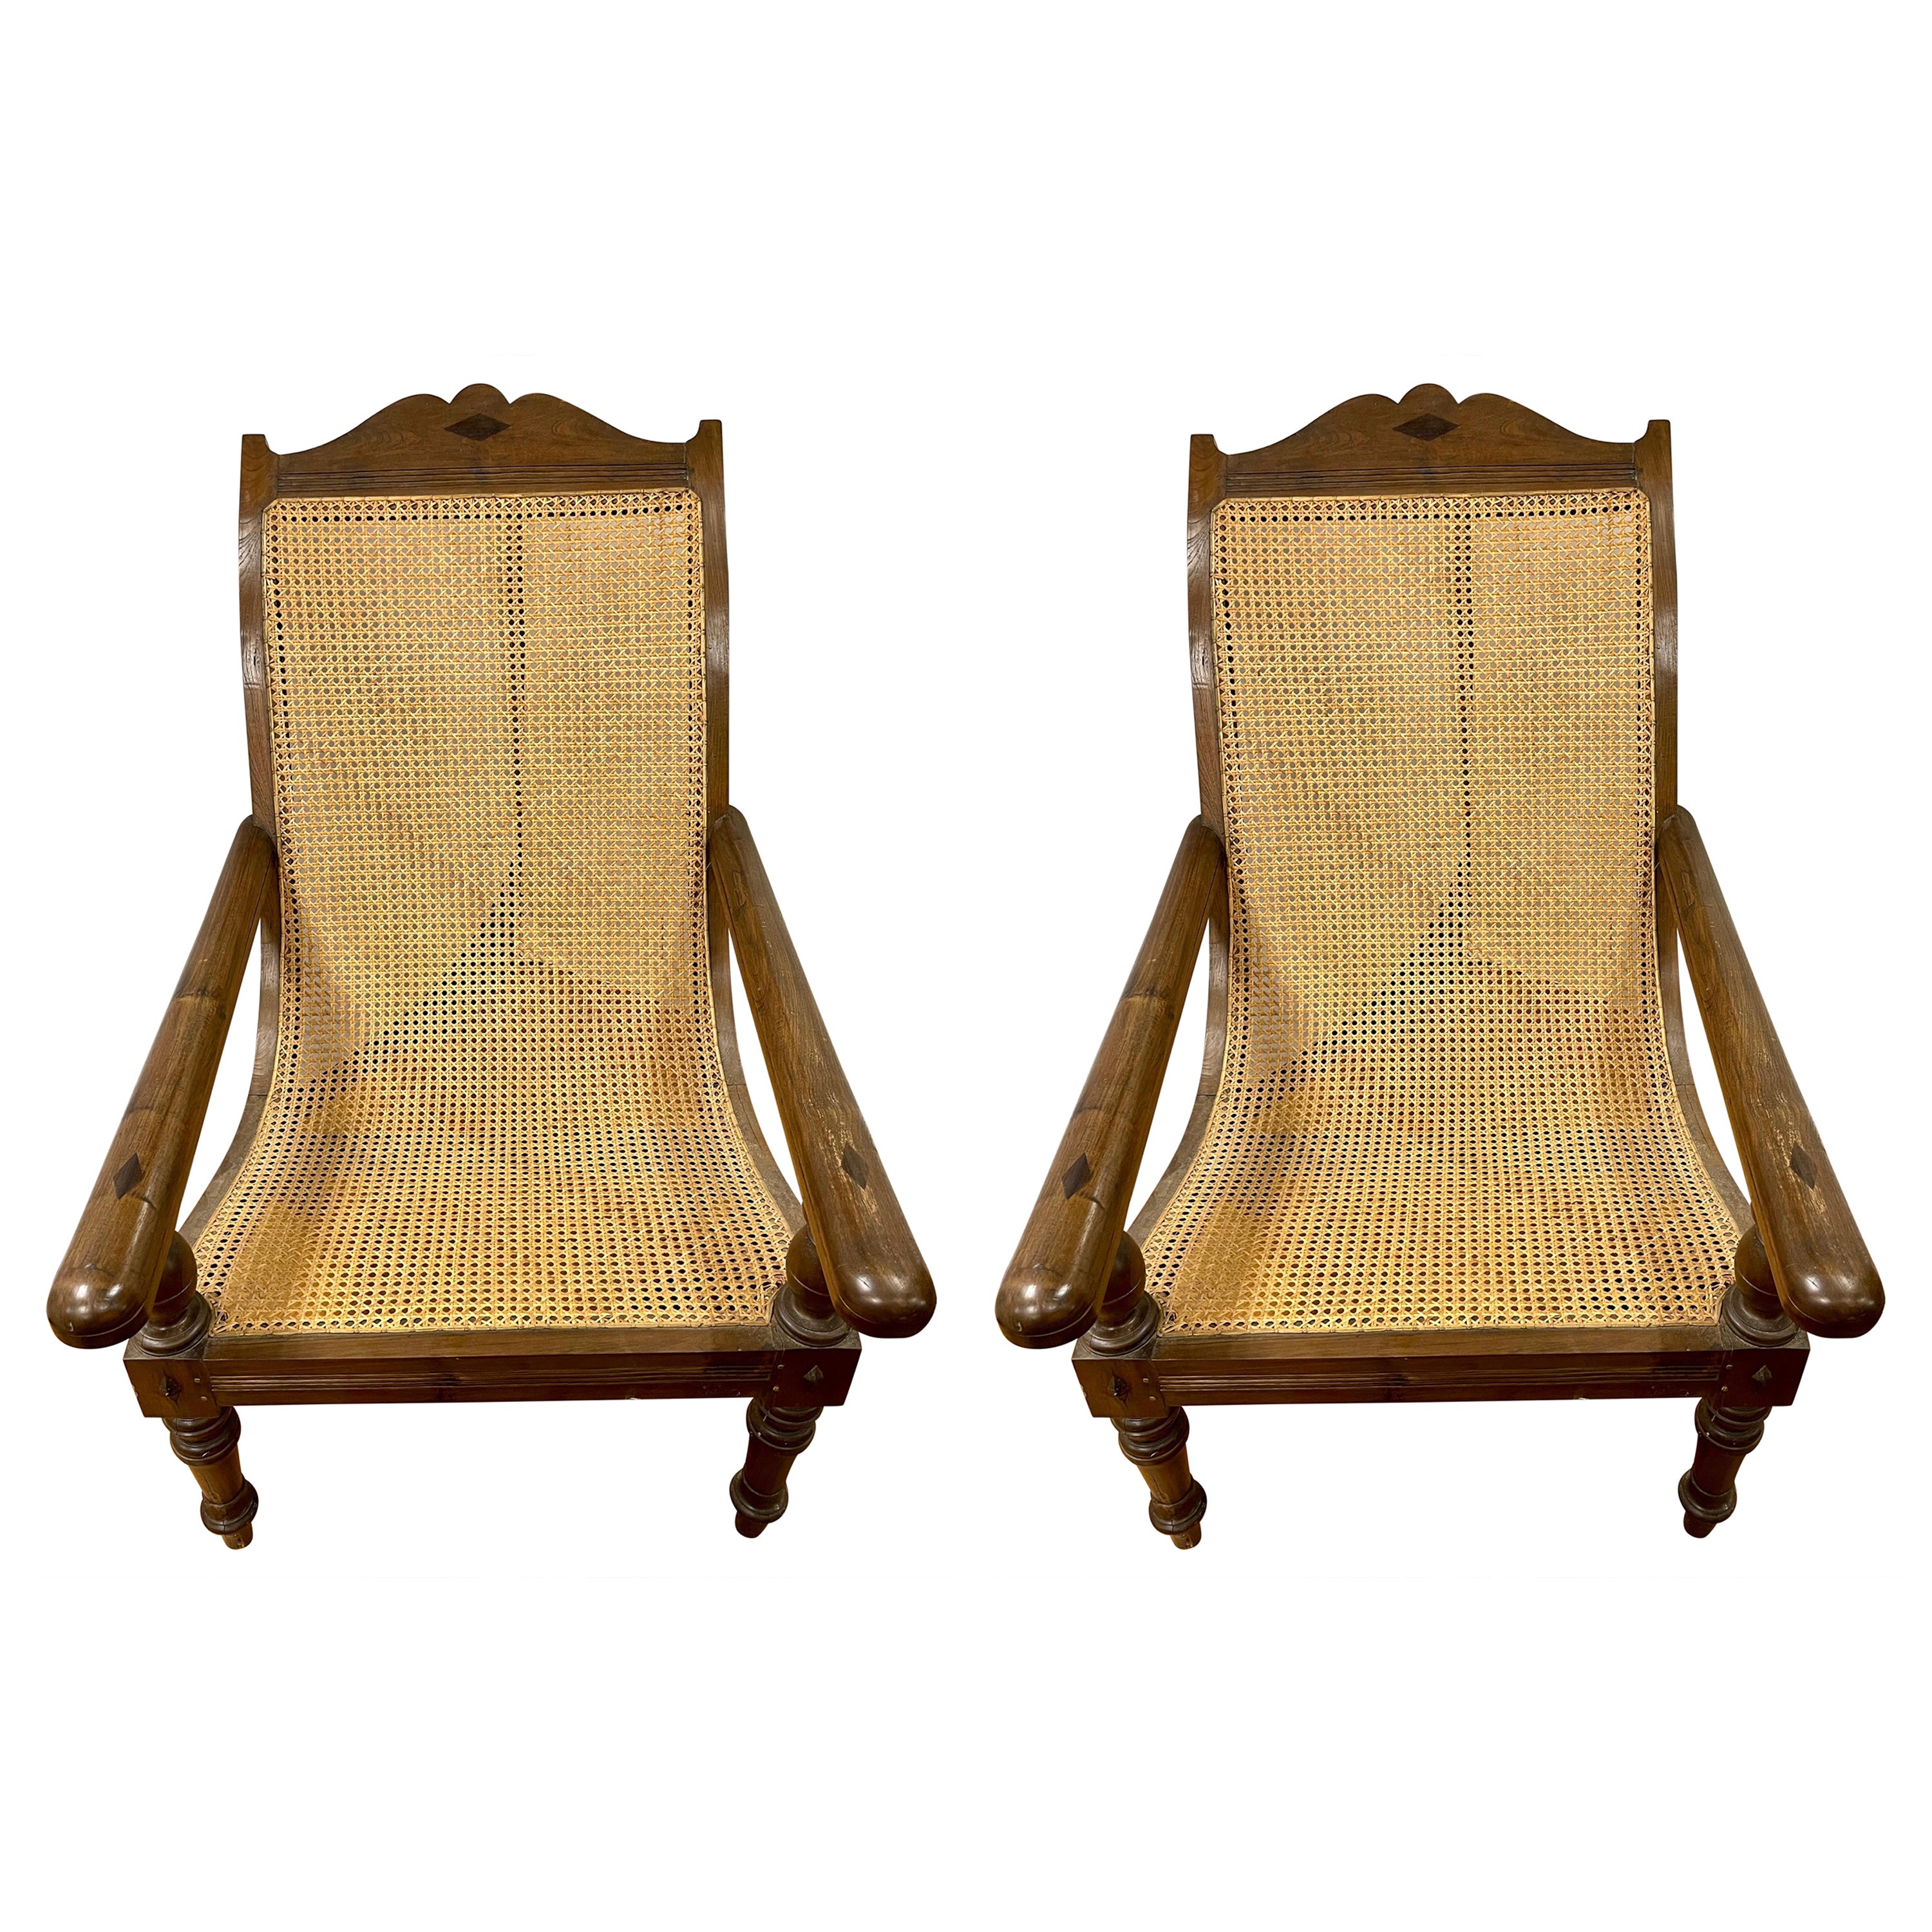 Pair of Matching British Colonial Cane Plantation Chairs with Pullout Leg Rests